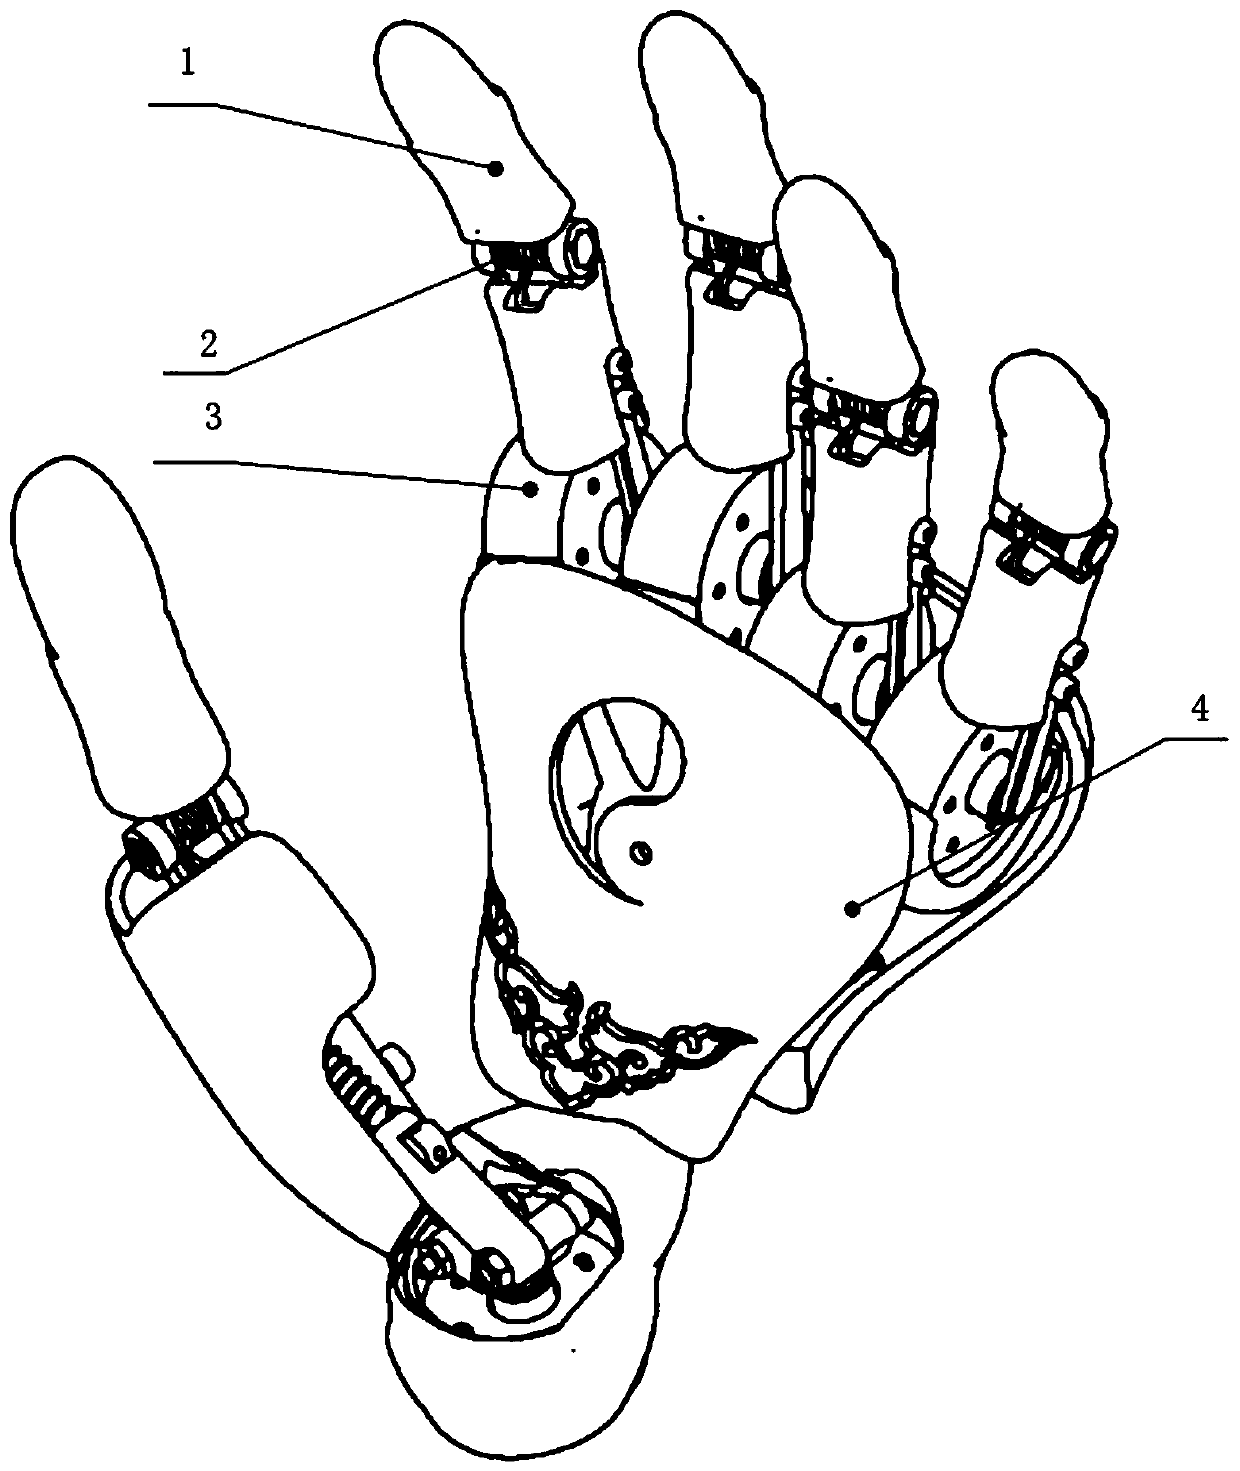 Rigid and flexible combined humanoid five-finger mechanical gripper